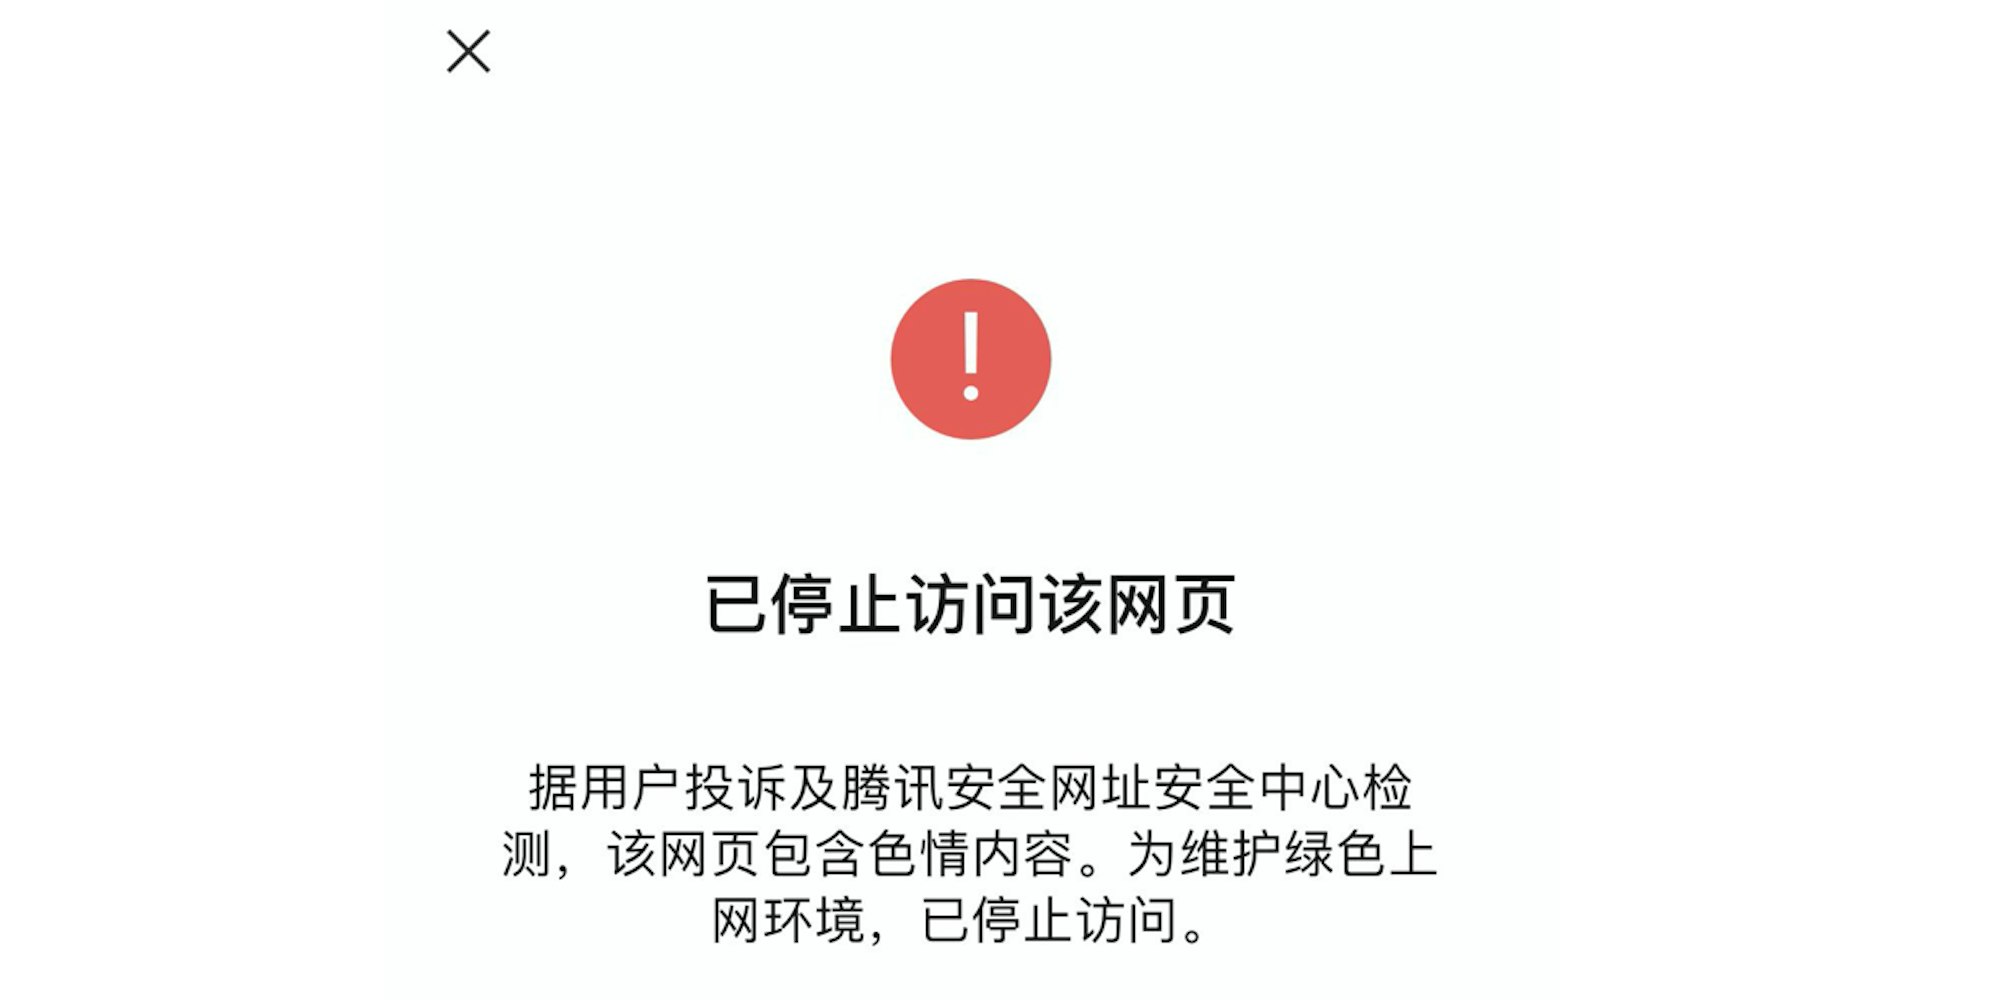 Example of trying to visit an overseas website from WeChat.